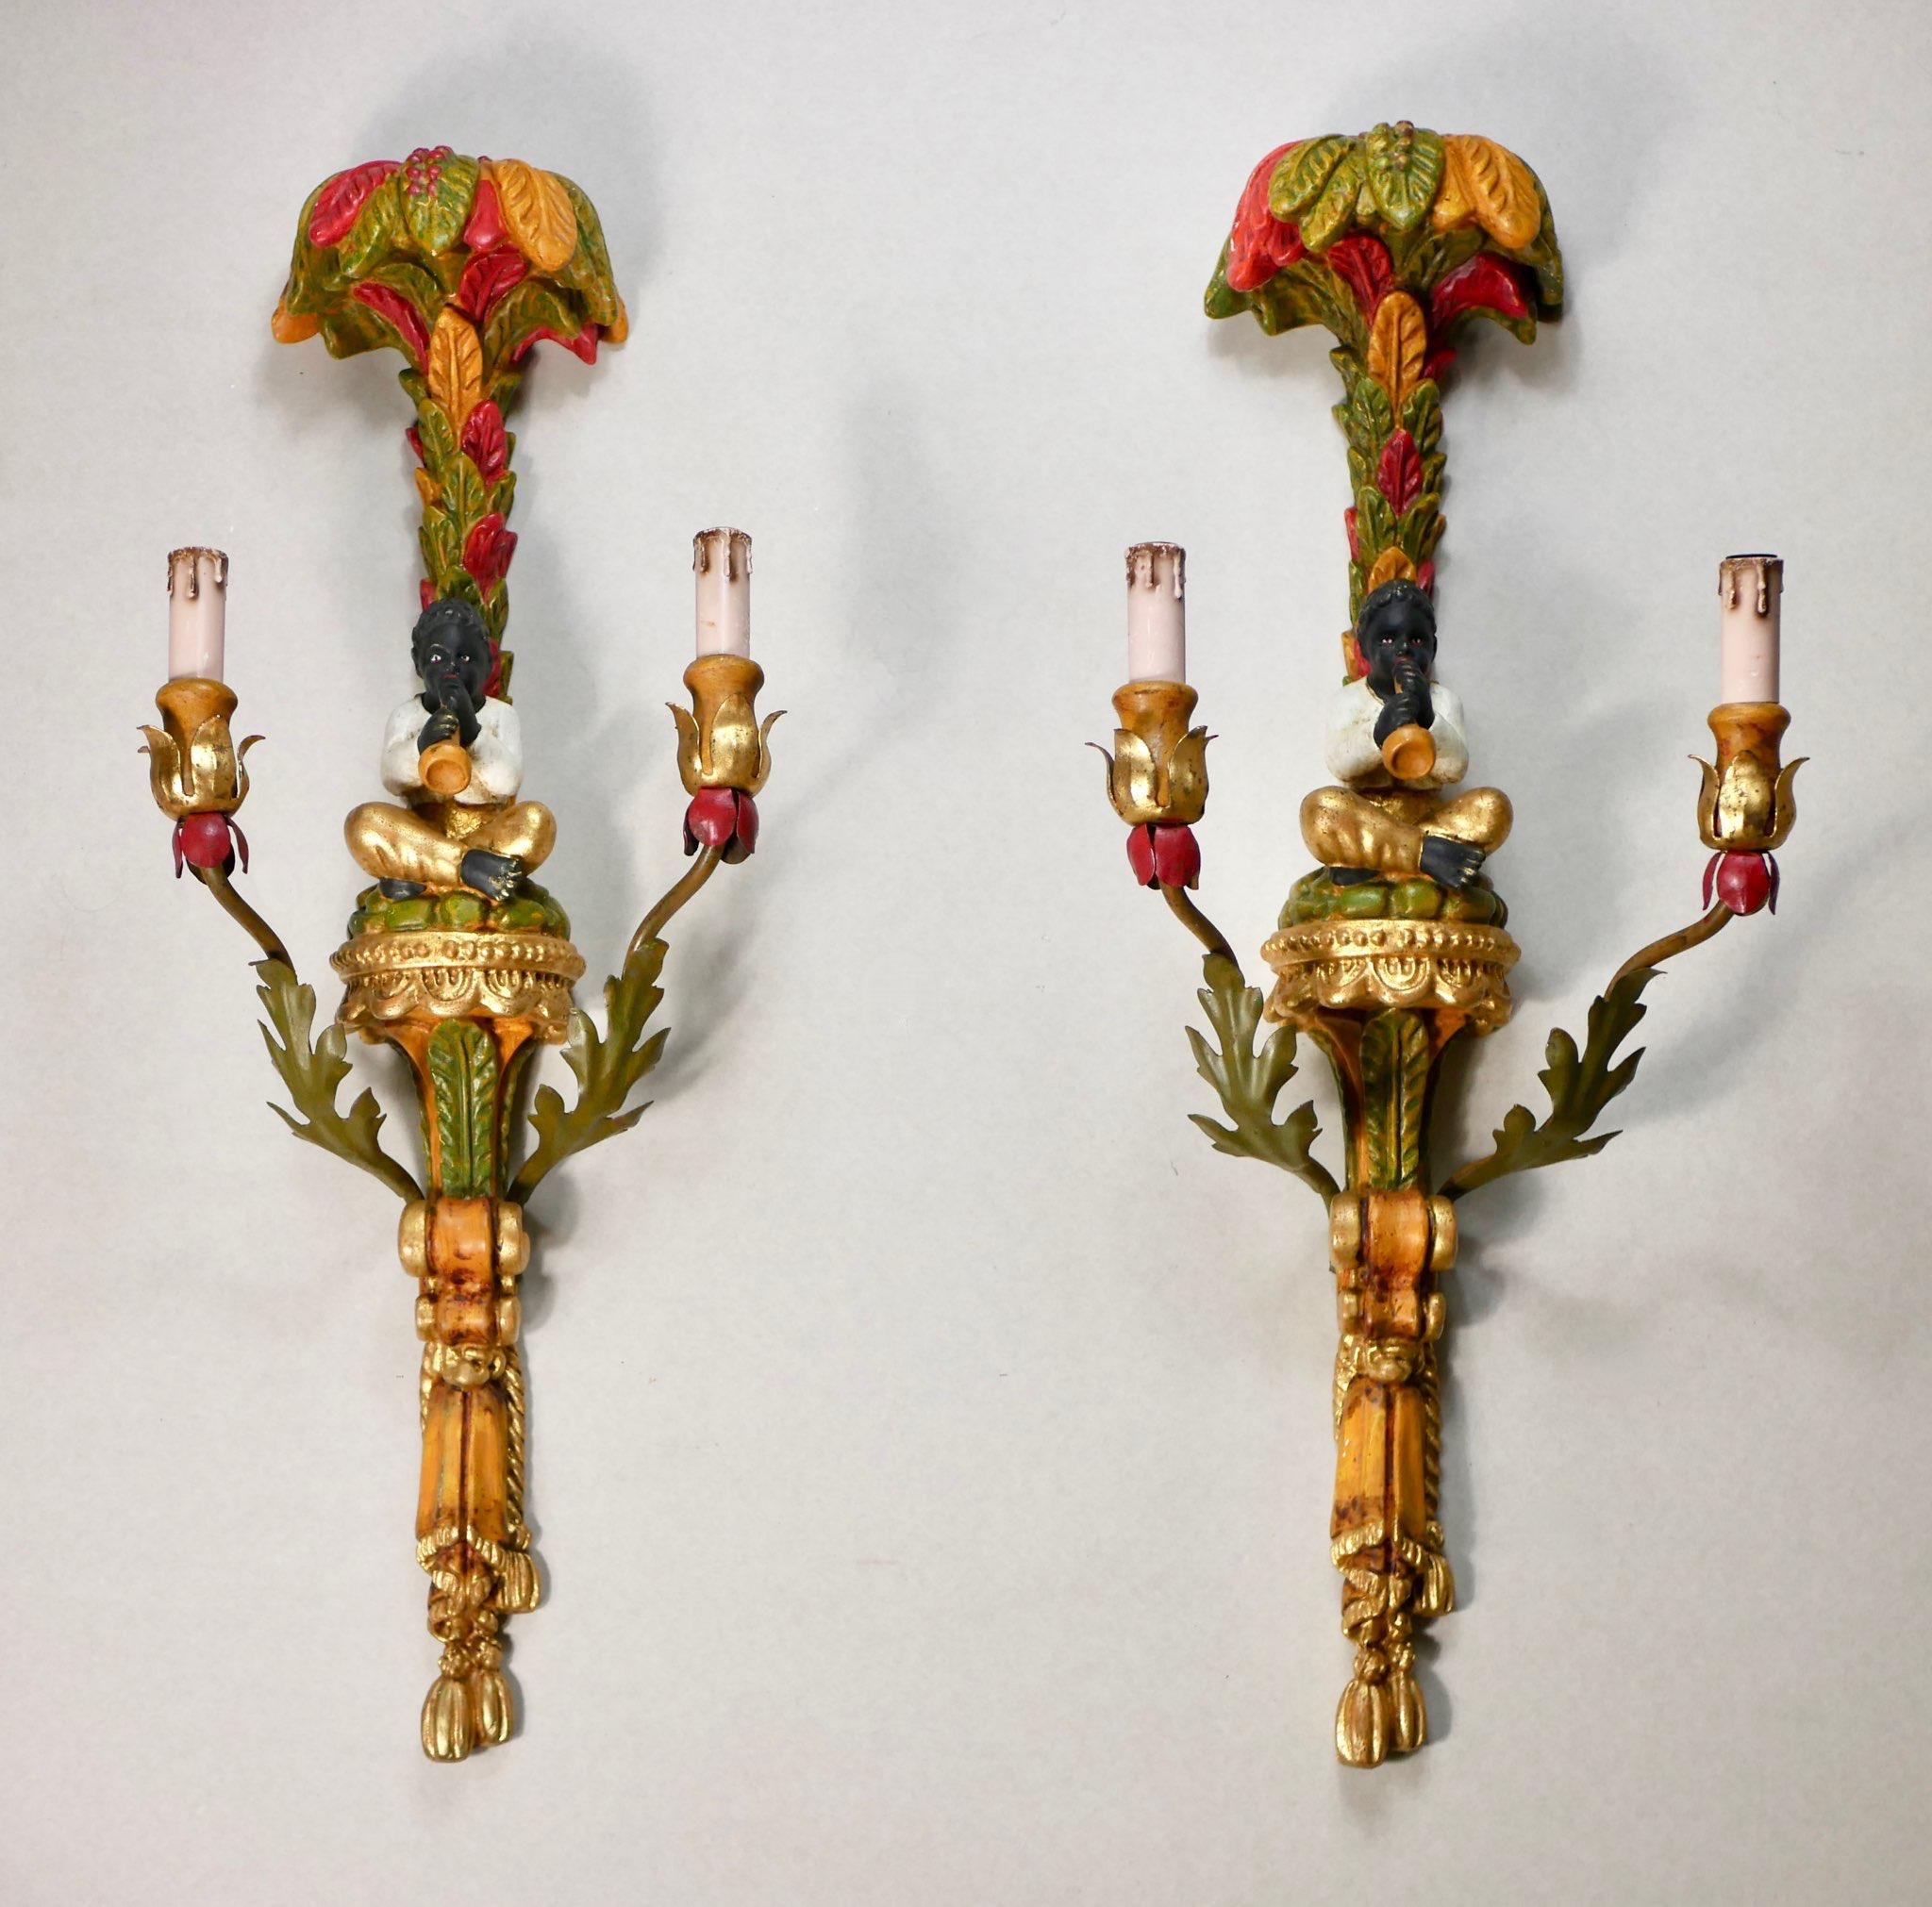 Stunning pair of large polychrome hand carved wood sconces, in the style of the Venetian creations of the 18th century, made in Italy in the early 1920s. 
Representing a Nubian playing flute under a palm tree, they feature vibrant colors, gilded